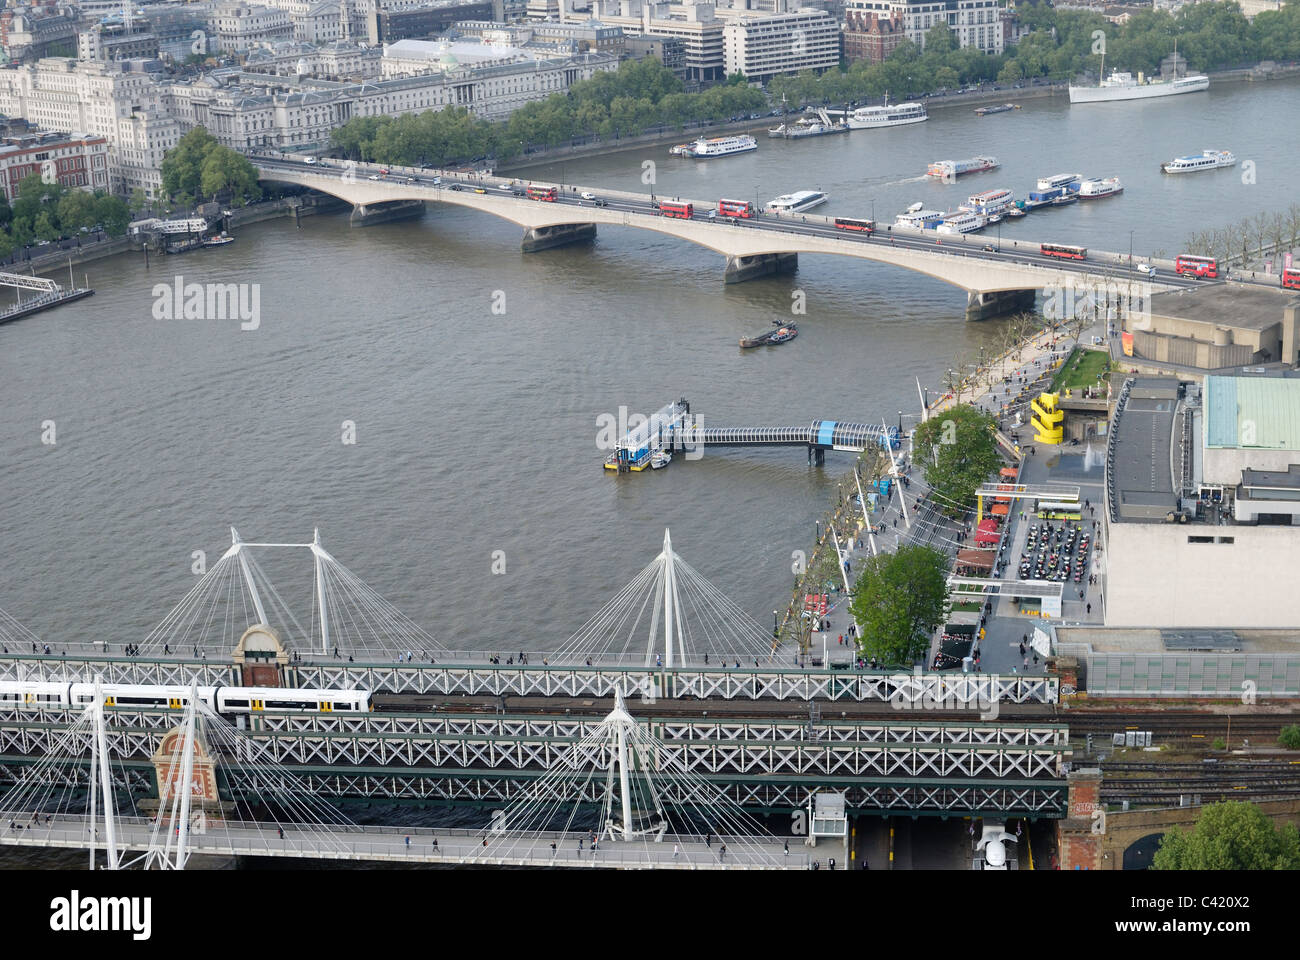 Hungerford and Waterloo Bridges over the River Thames. Westminster. London. England. South Bank Centre on right. Stock Photo